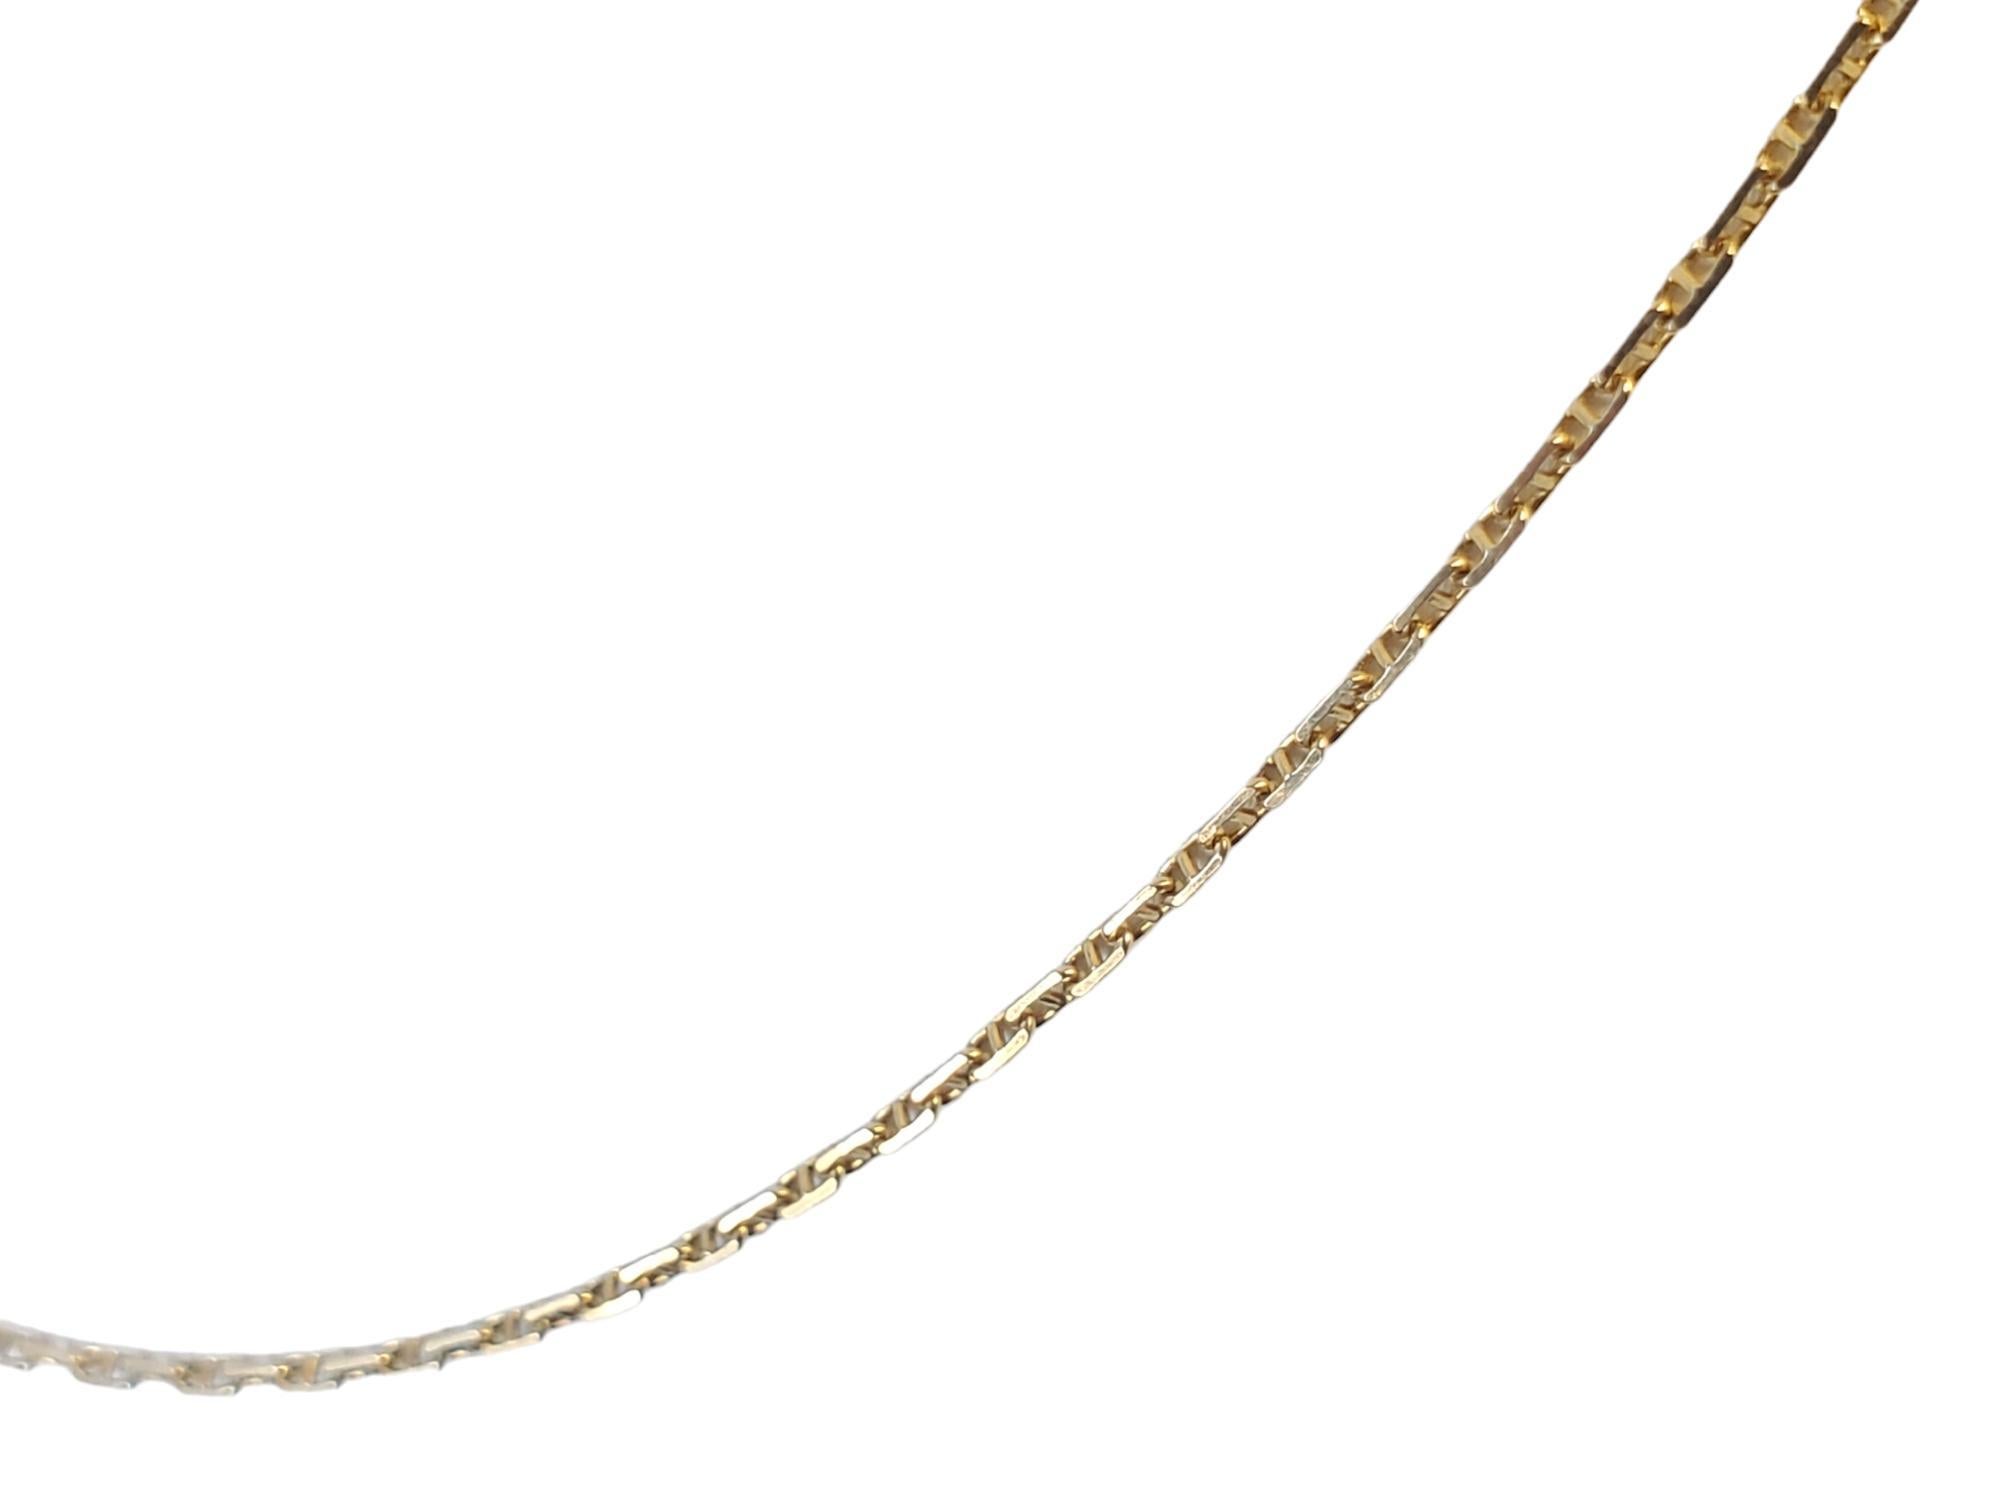 Vintage Italian 14k Chain Yellow Gold Stamped Link Necklace Minimalistic For Sale 3